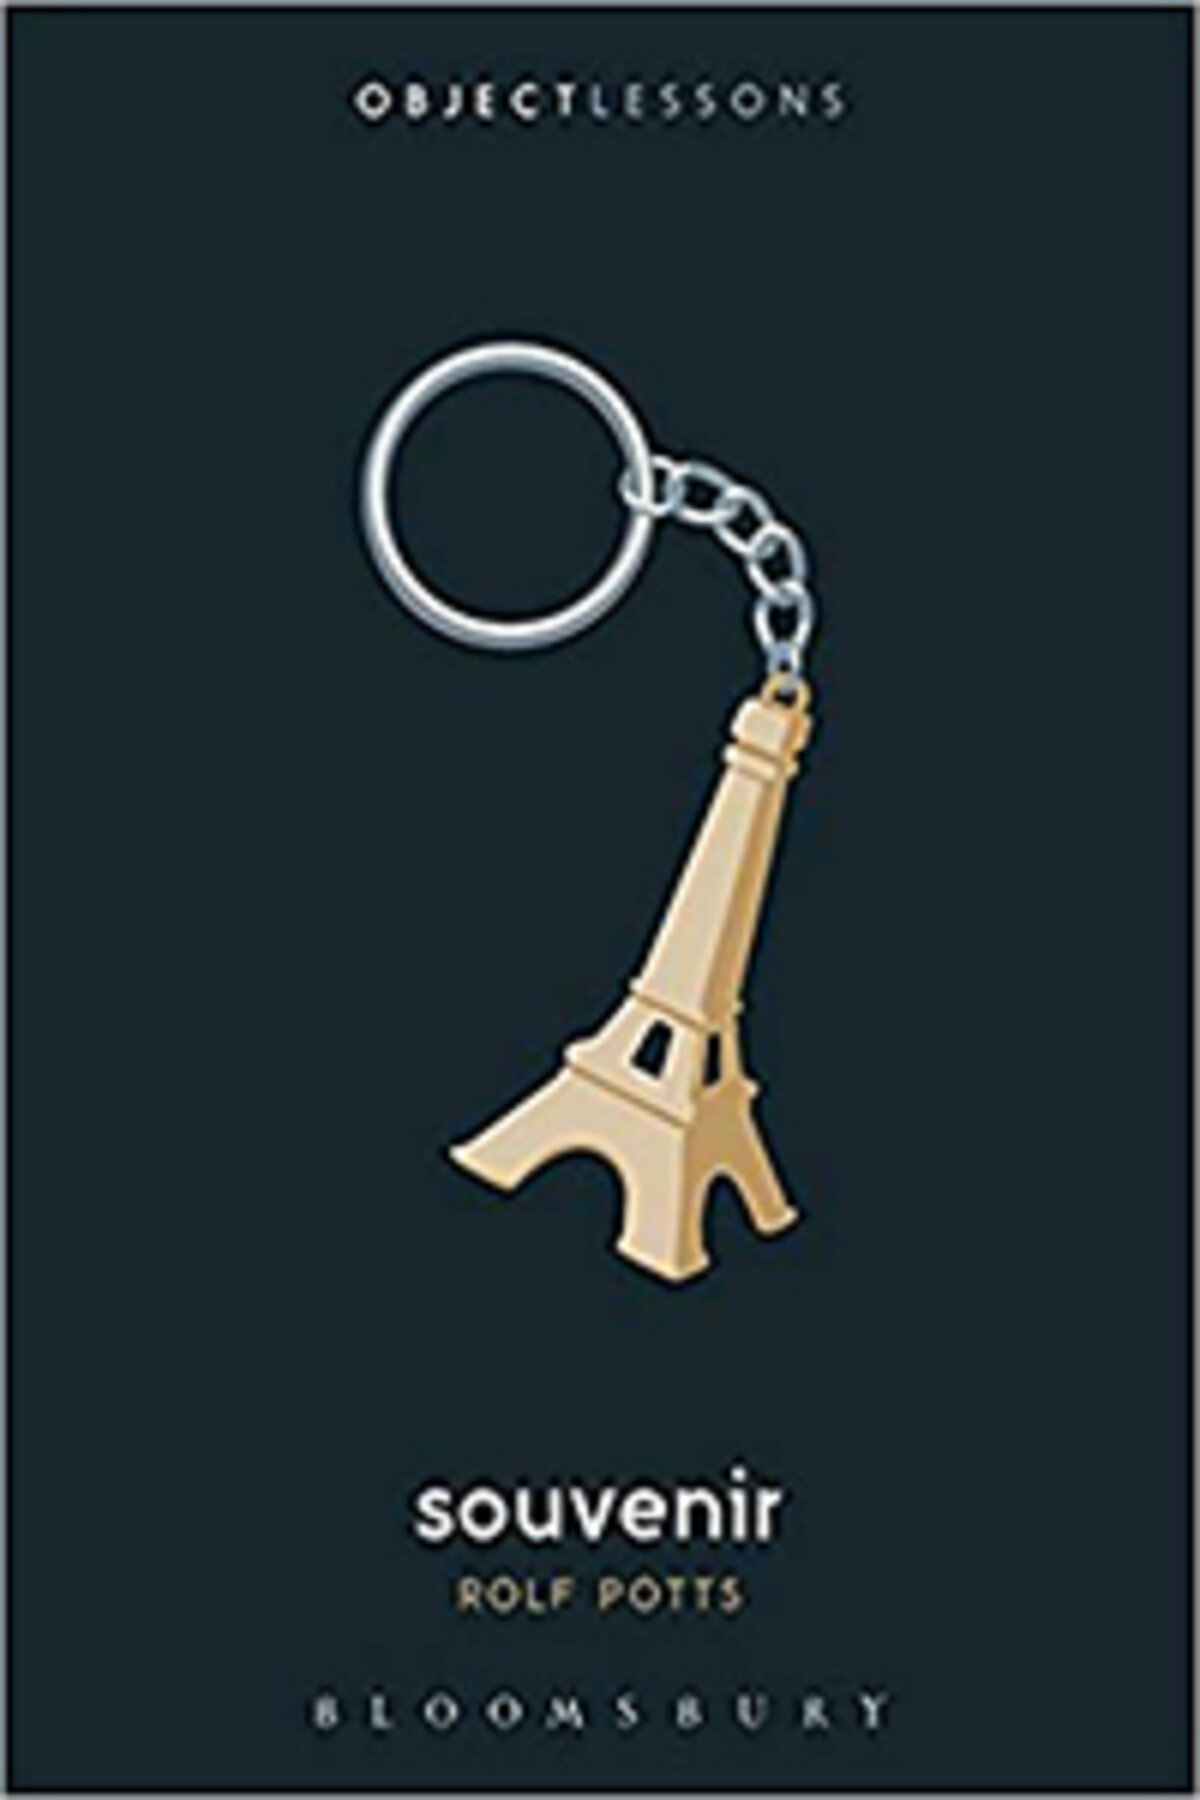 Eifle Tower keychain on book cover of Souvenir by Rolf Potts